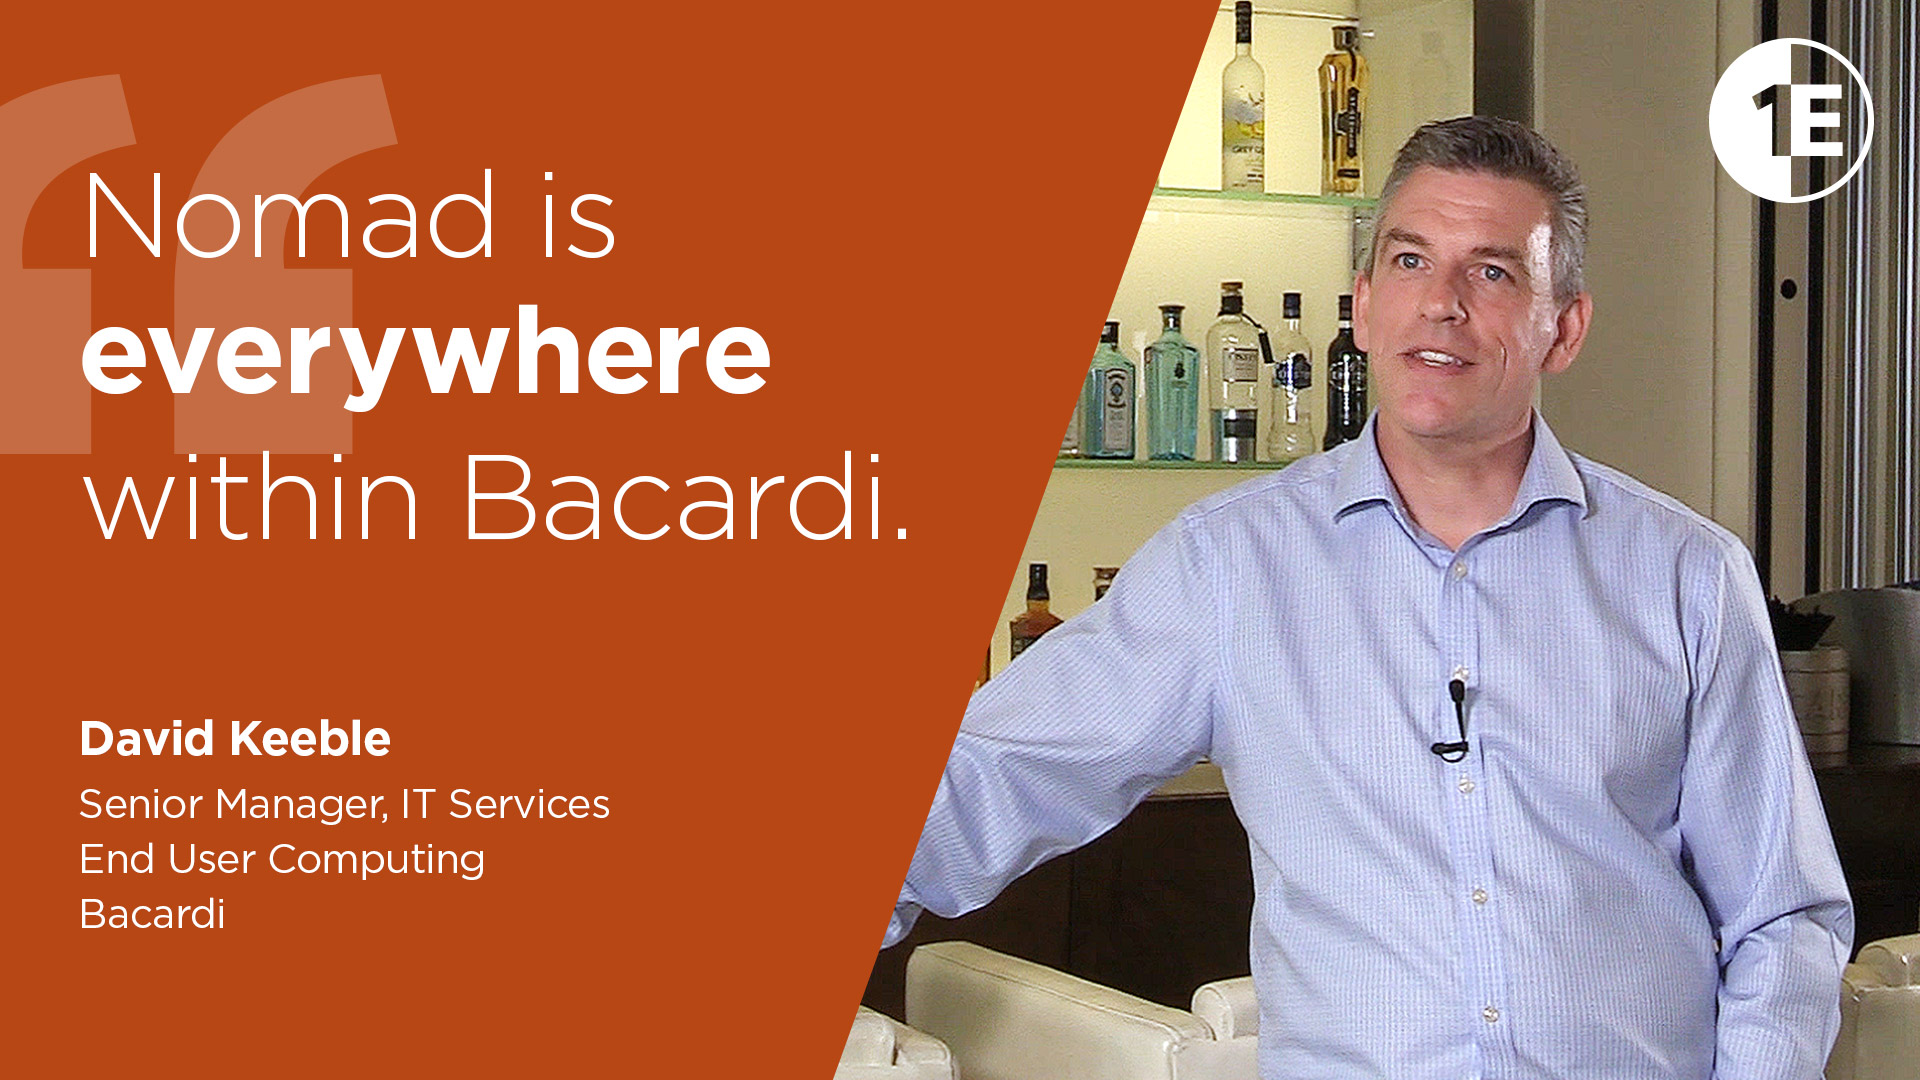 Bacardi and 1E: a perfect cocktail for the Windows 10 era